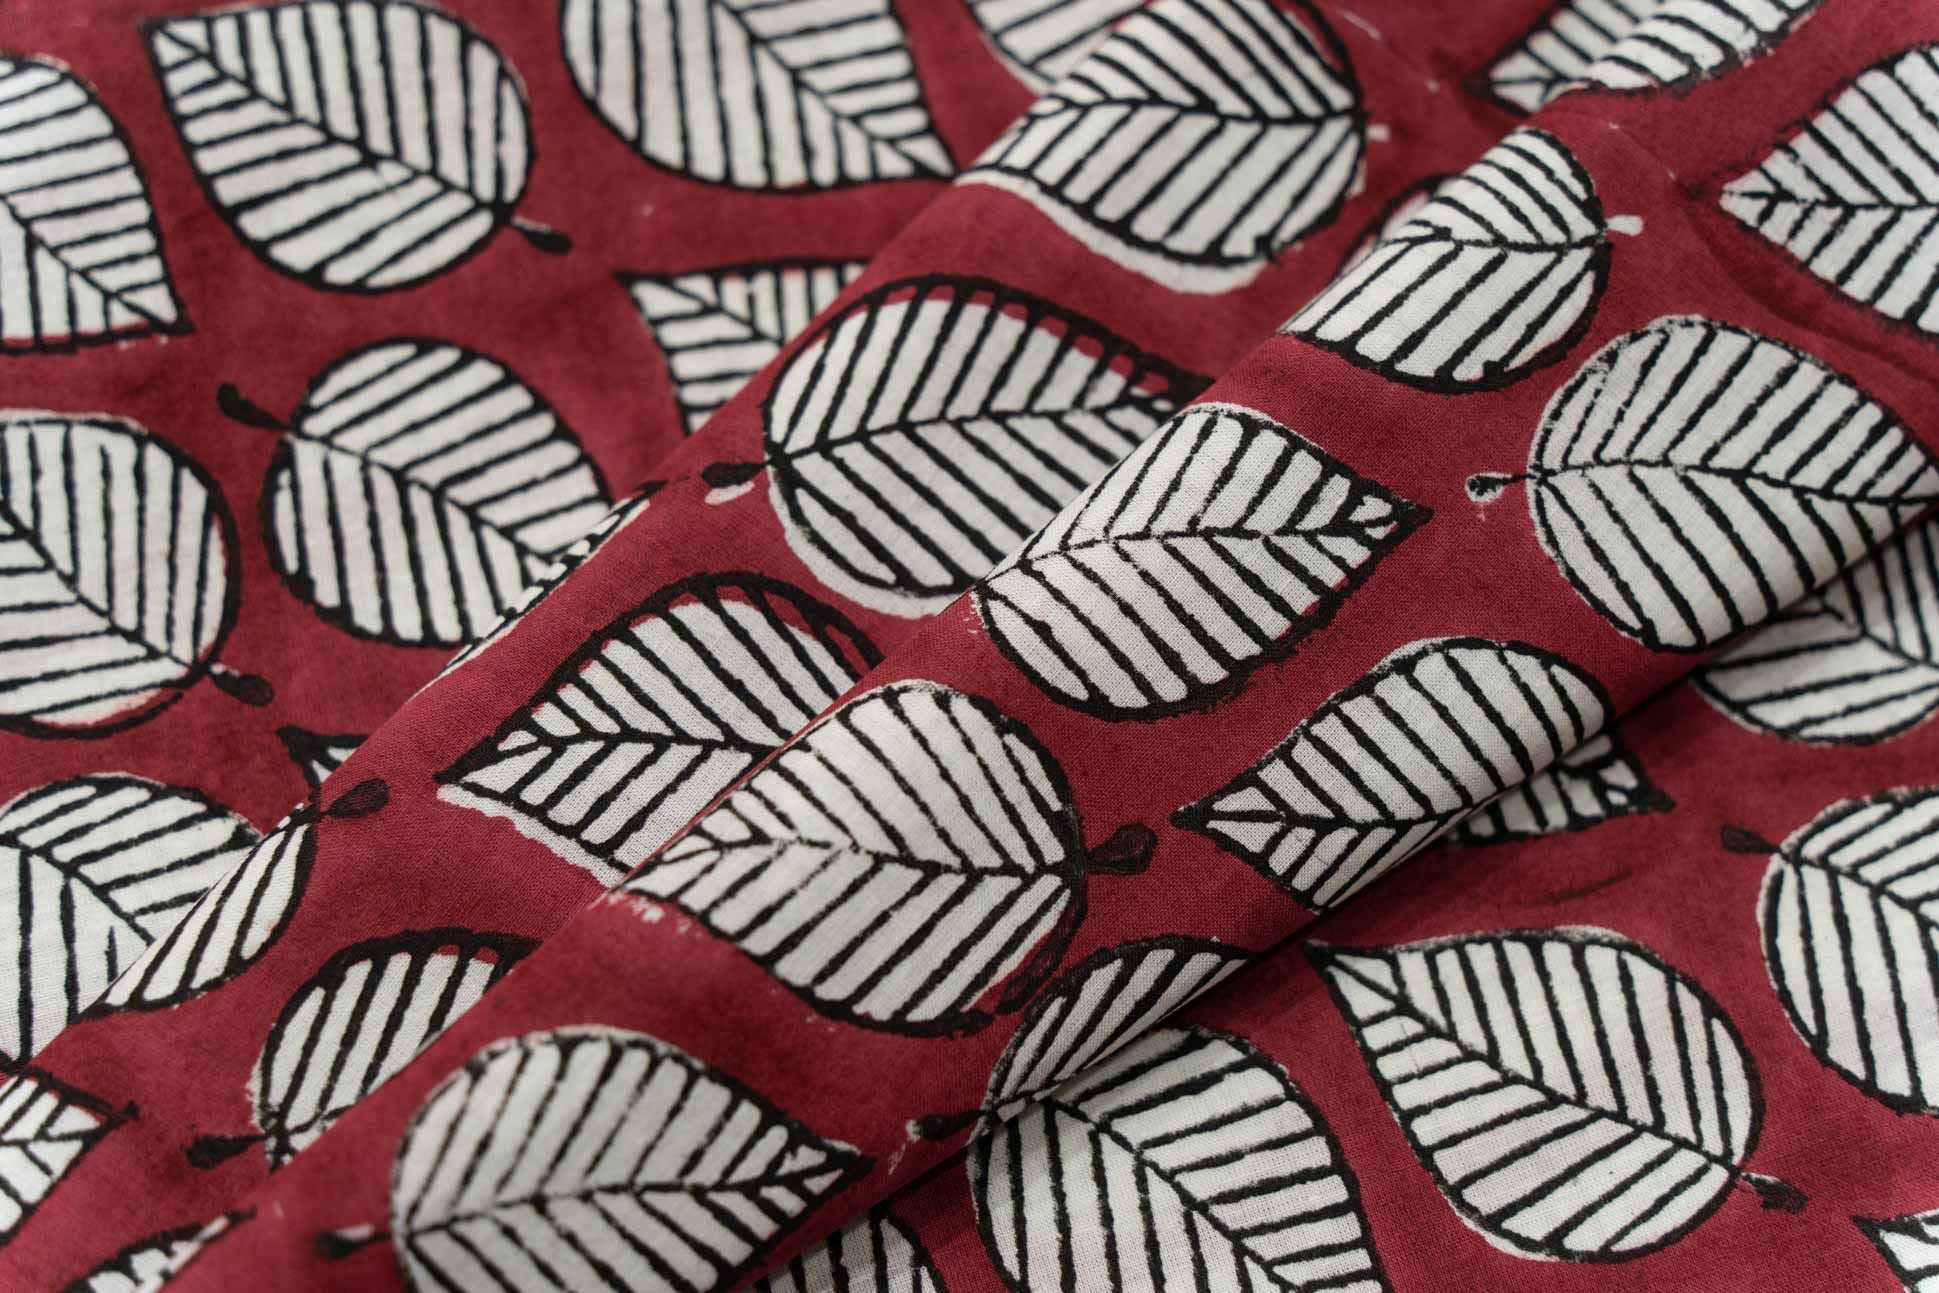 Mary Red Leaf Block Printed Fabric